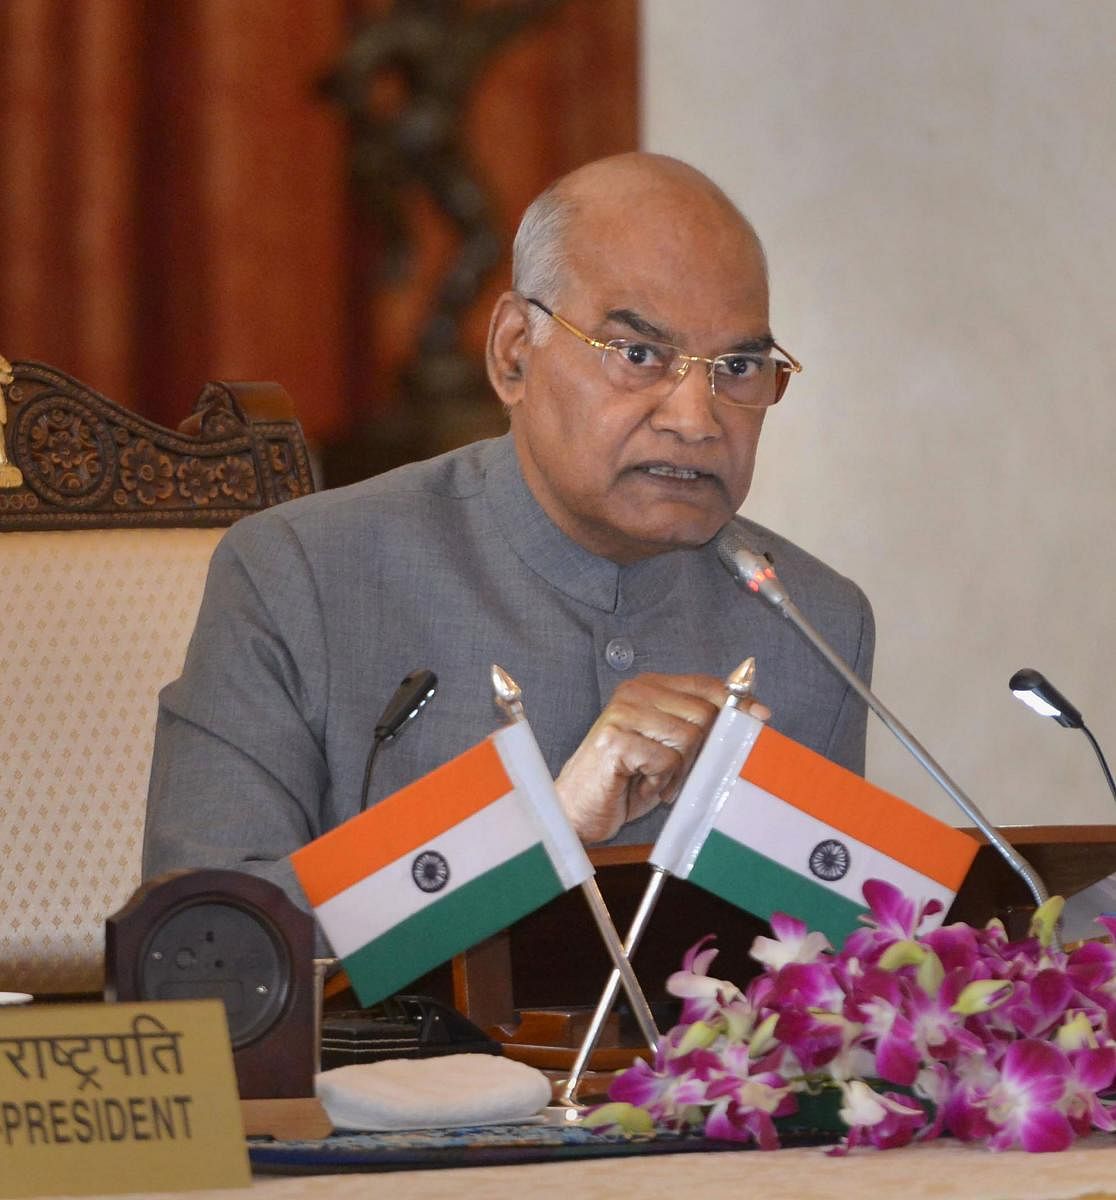 A group of “concerned citizens” comprising diplomats and army generals on Friday wrote to President Ram Nath Kovind, seeking action against those indulging in violence in the name of anti-CAA protests. (PTI File Photo)